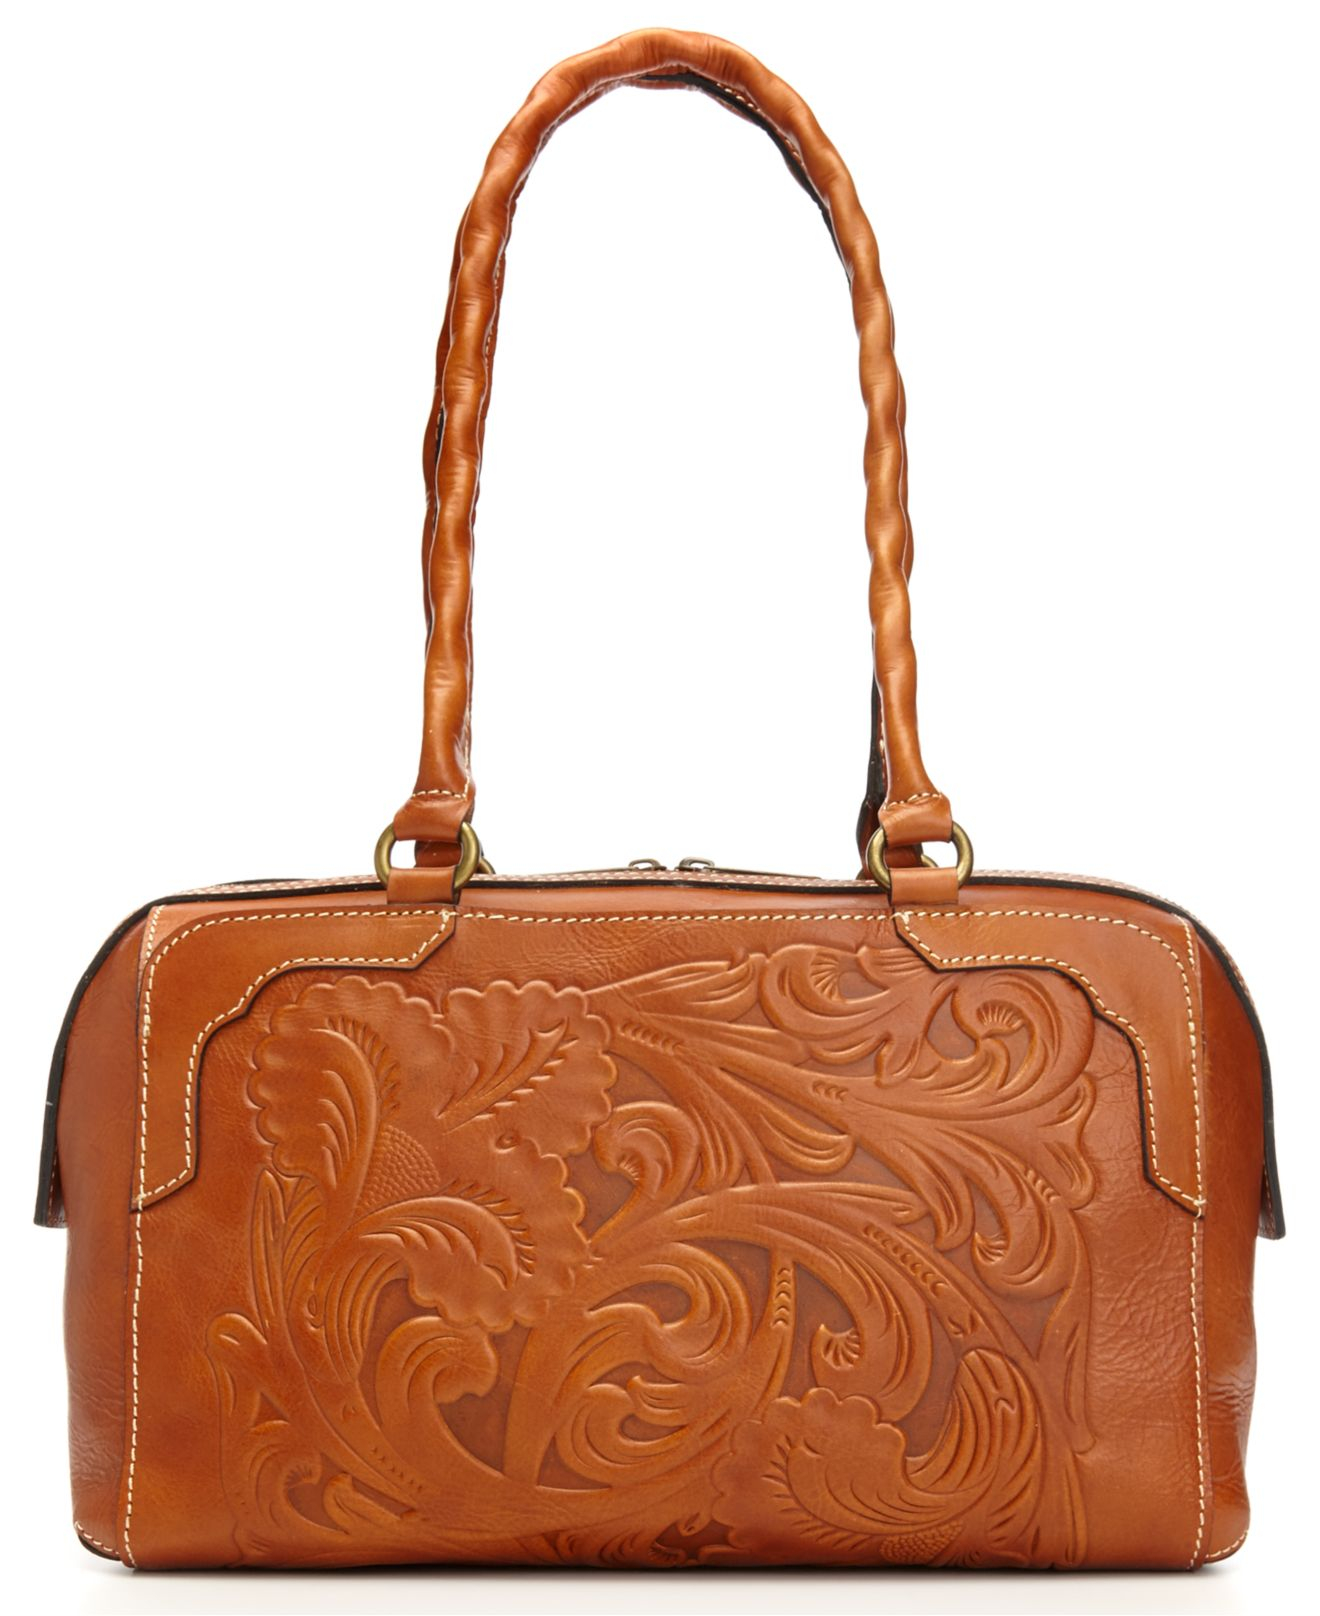 Lyst - Patricia nash Tooled Fabriano Satchel in Brown